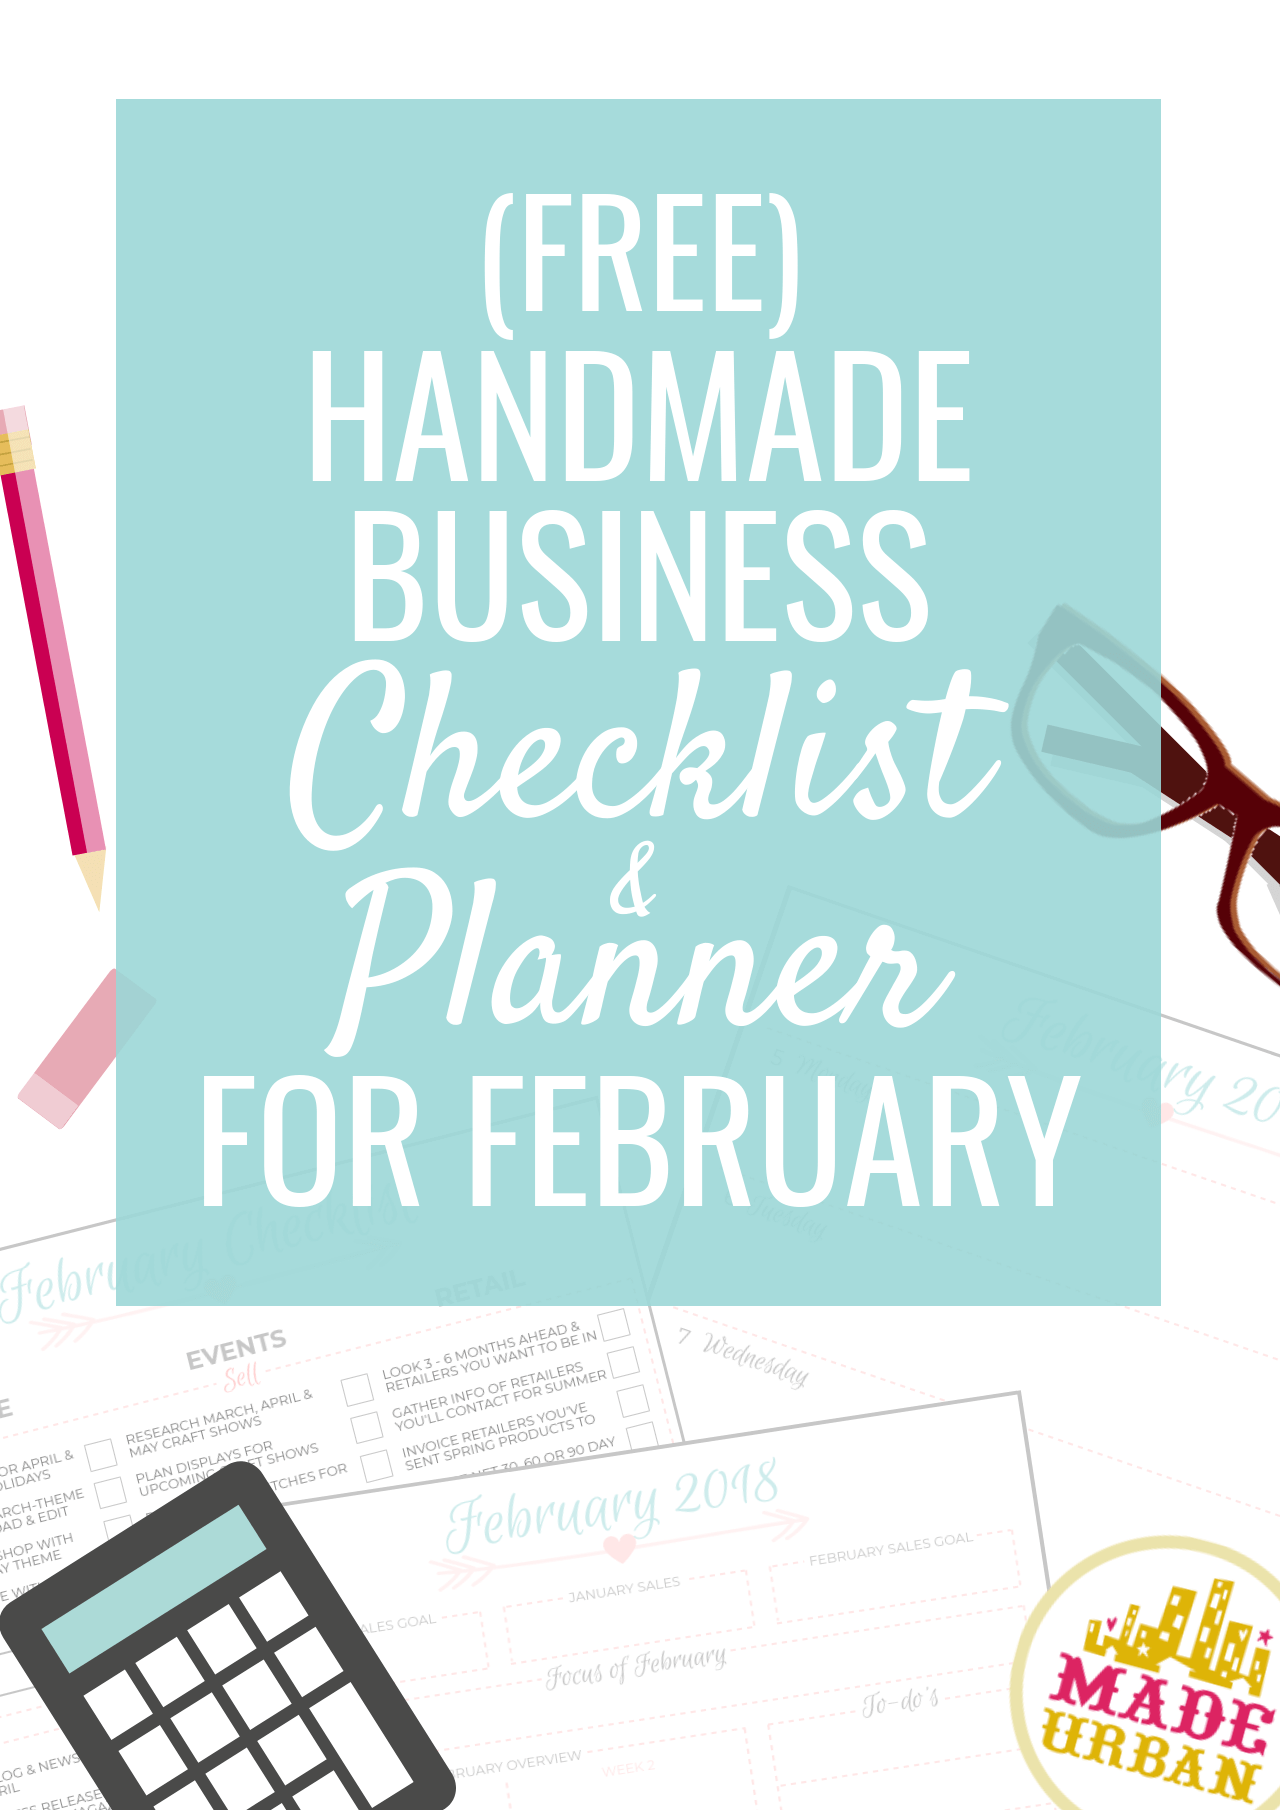 Here's what a handmade business owner should be working on in February. This article comes with a free printable checklist and planner for the month.